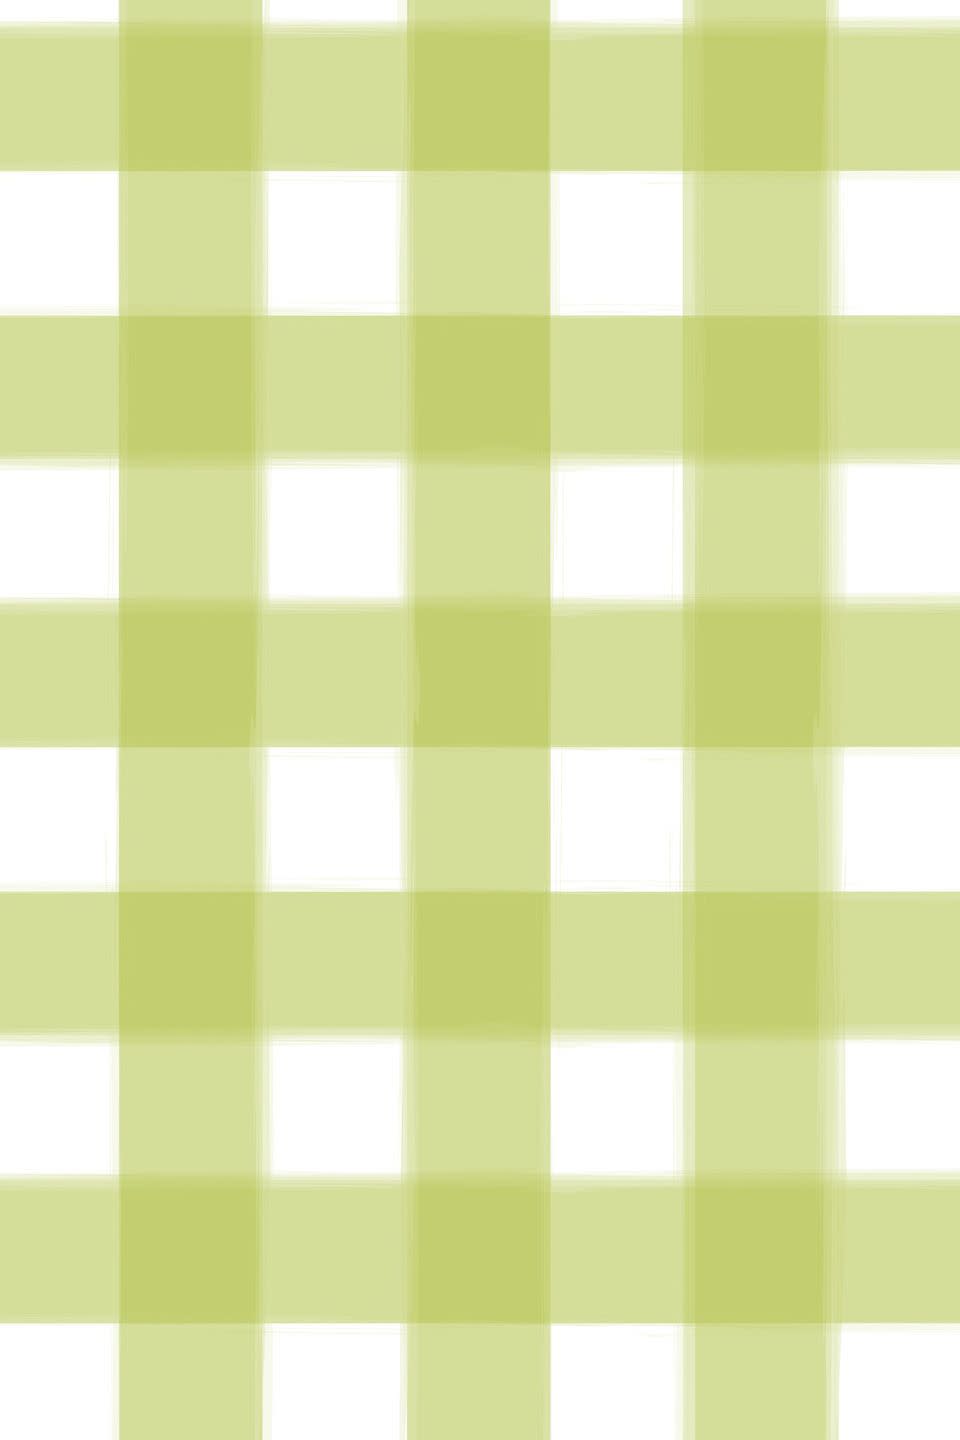 Green, Yellow, Line, Plaid, Pattern, Square, Parallel, 